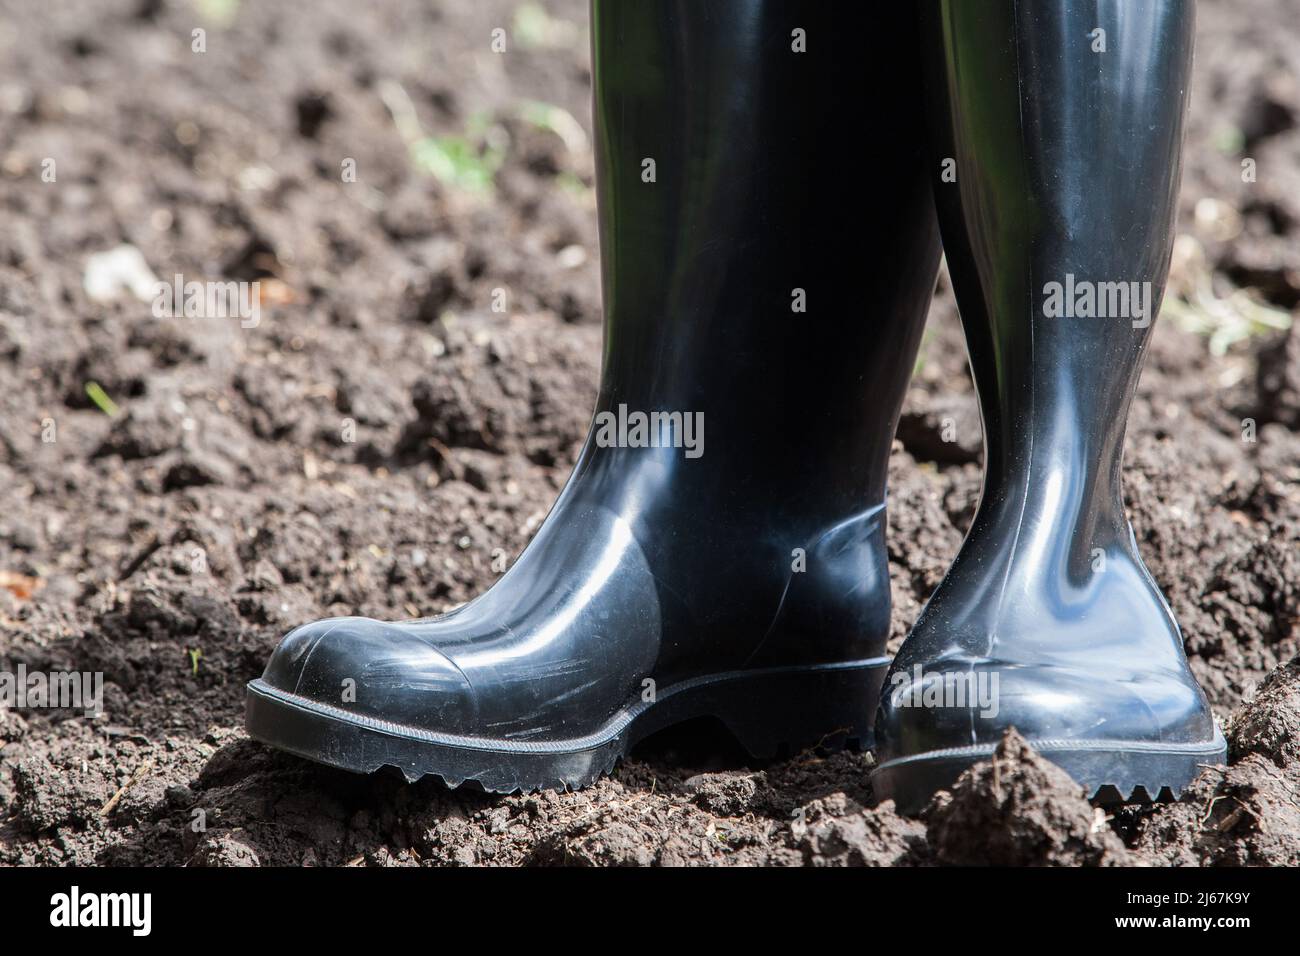 Agriculture was one of the first industries to use simple black rubber boots. They are therefore also popularly referred to as peasant boots. Stock Photo